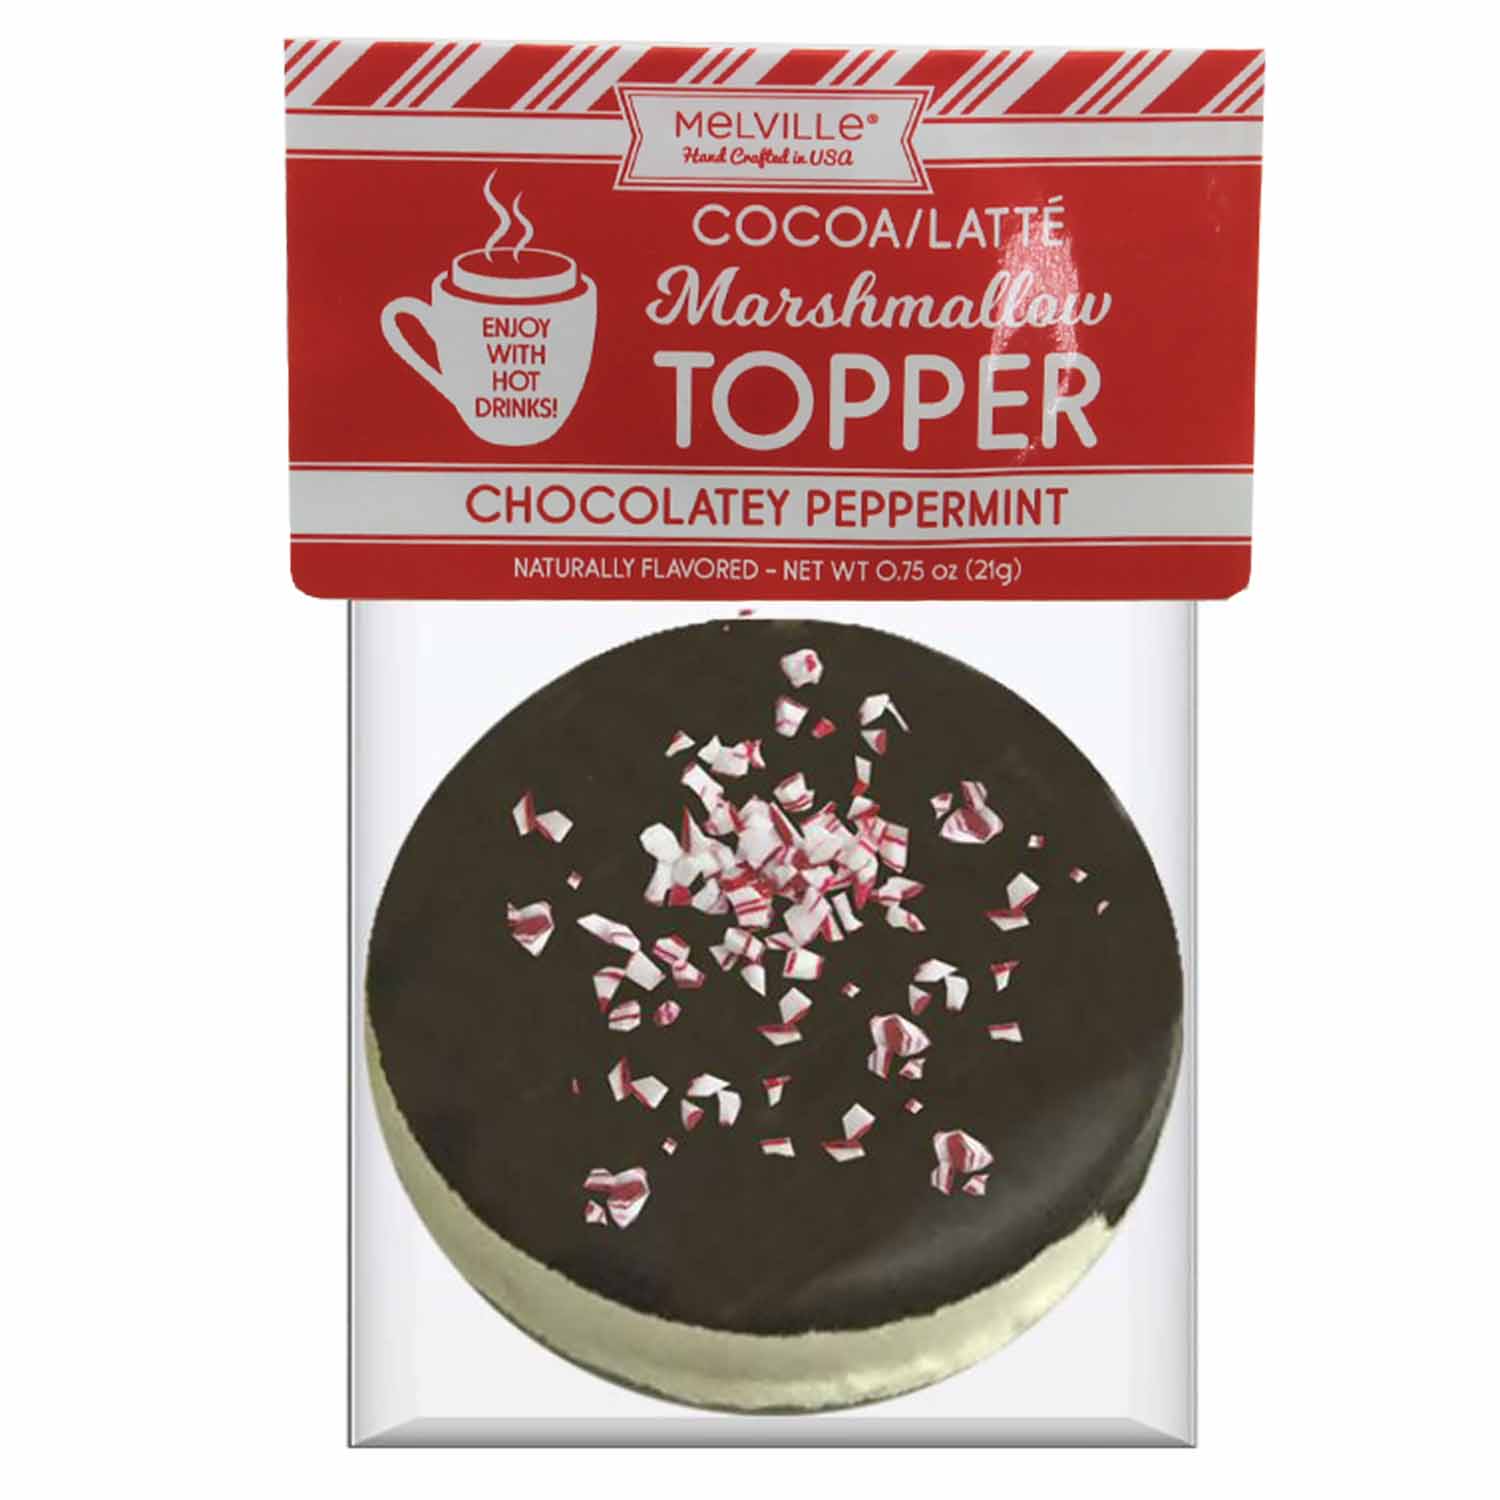 Melville Peppermint Marshmallow Hot Cocoa Toppers 4 Pack - World Market